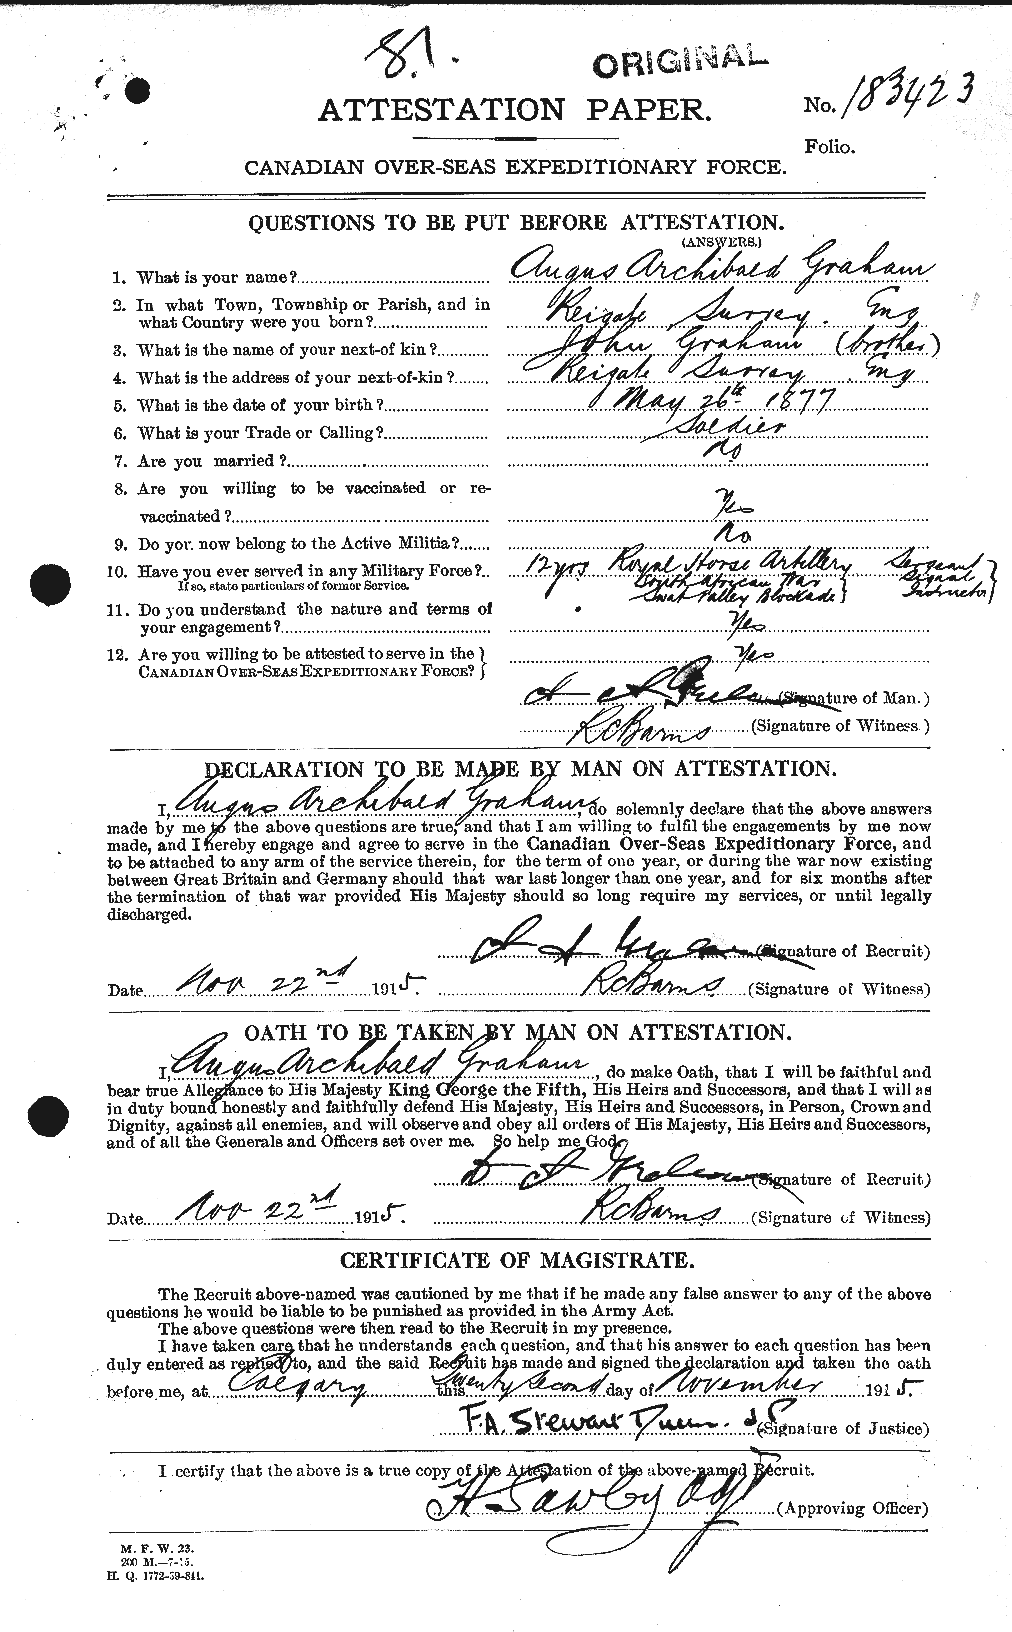 Personnel Records of the First World War - CEF 359624a